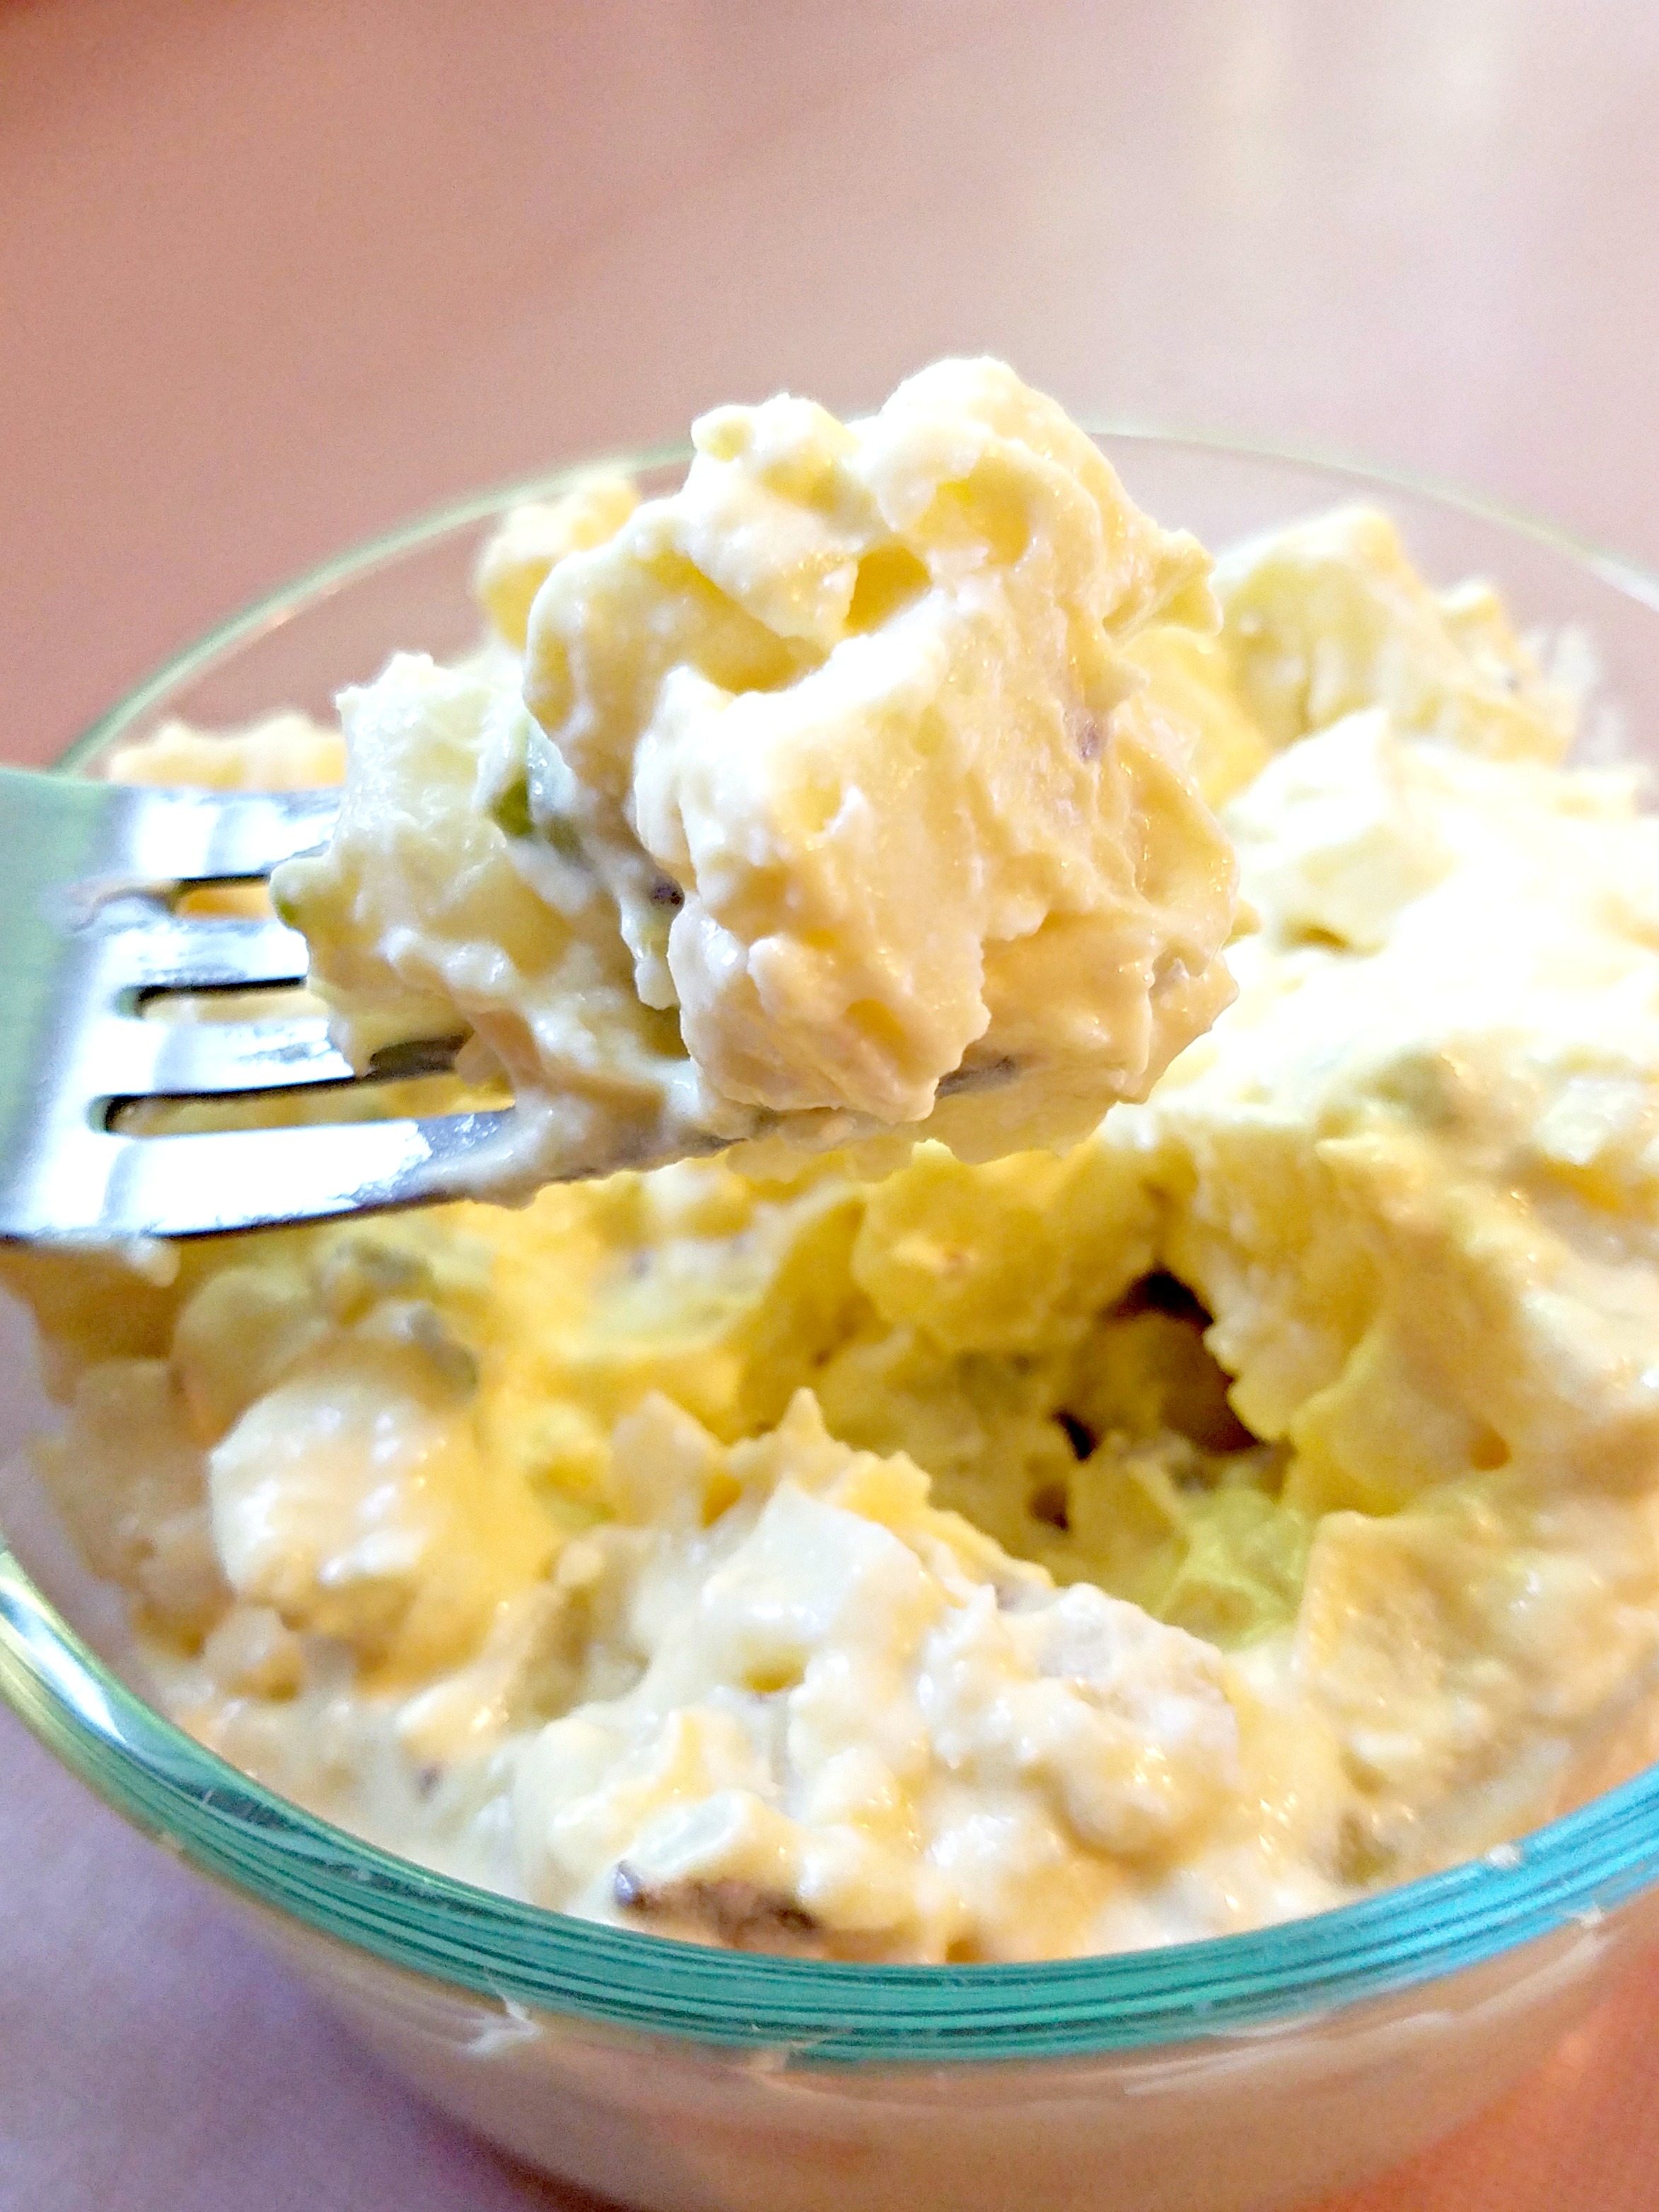 Amish Potato Salad is perfect for a get together and is a great recipe for a picnic. This potato salad recipe will be a hit.